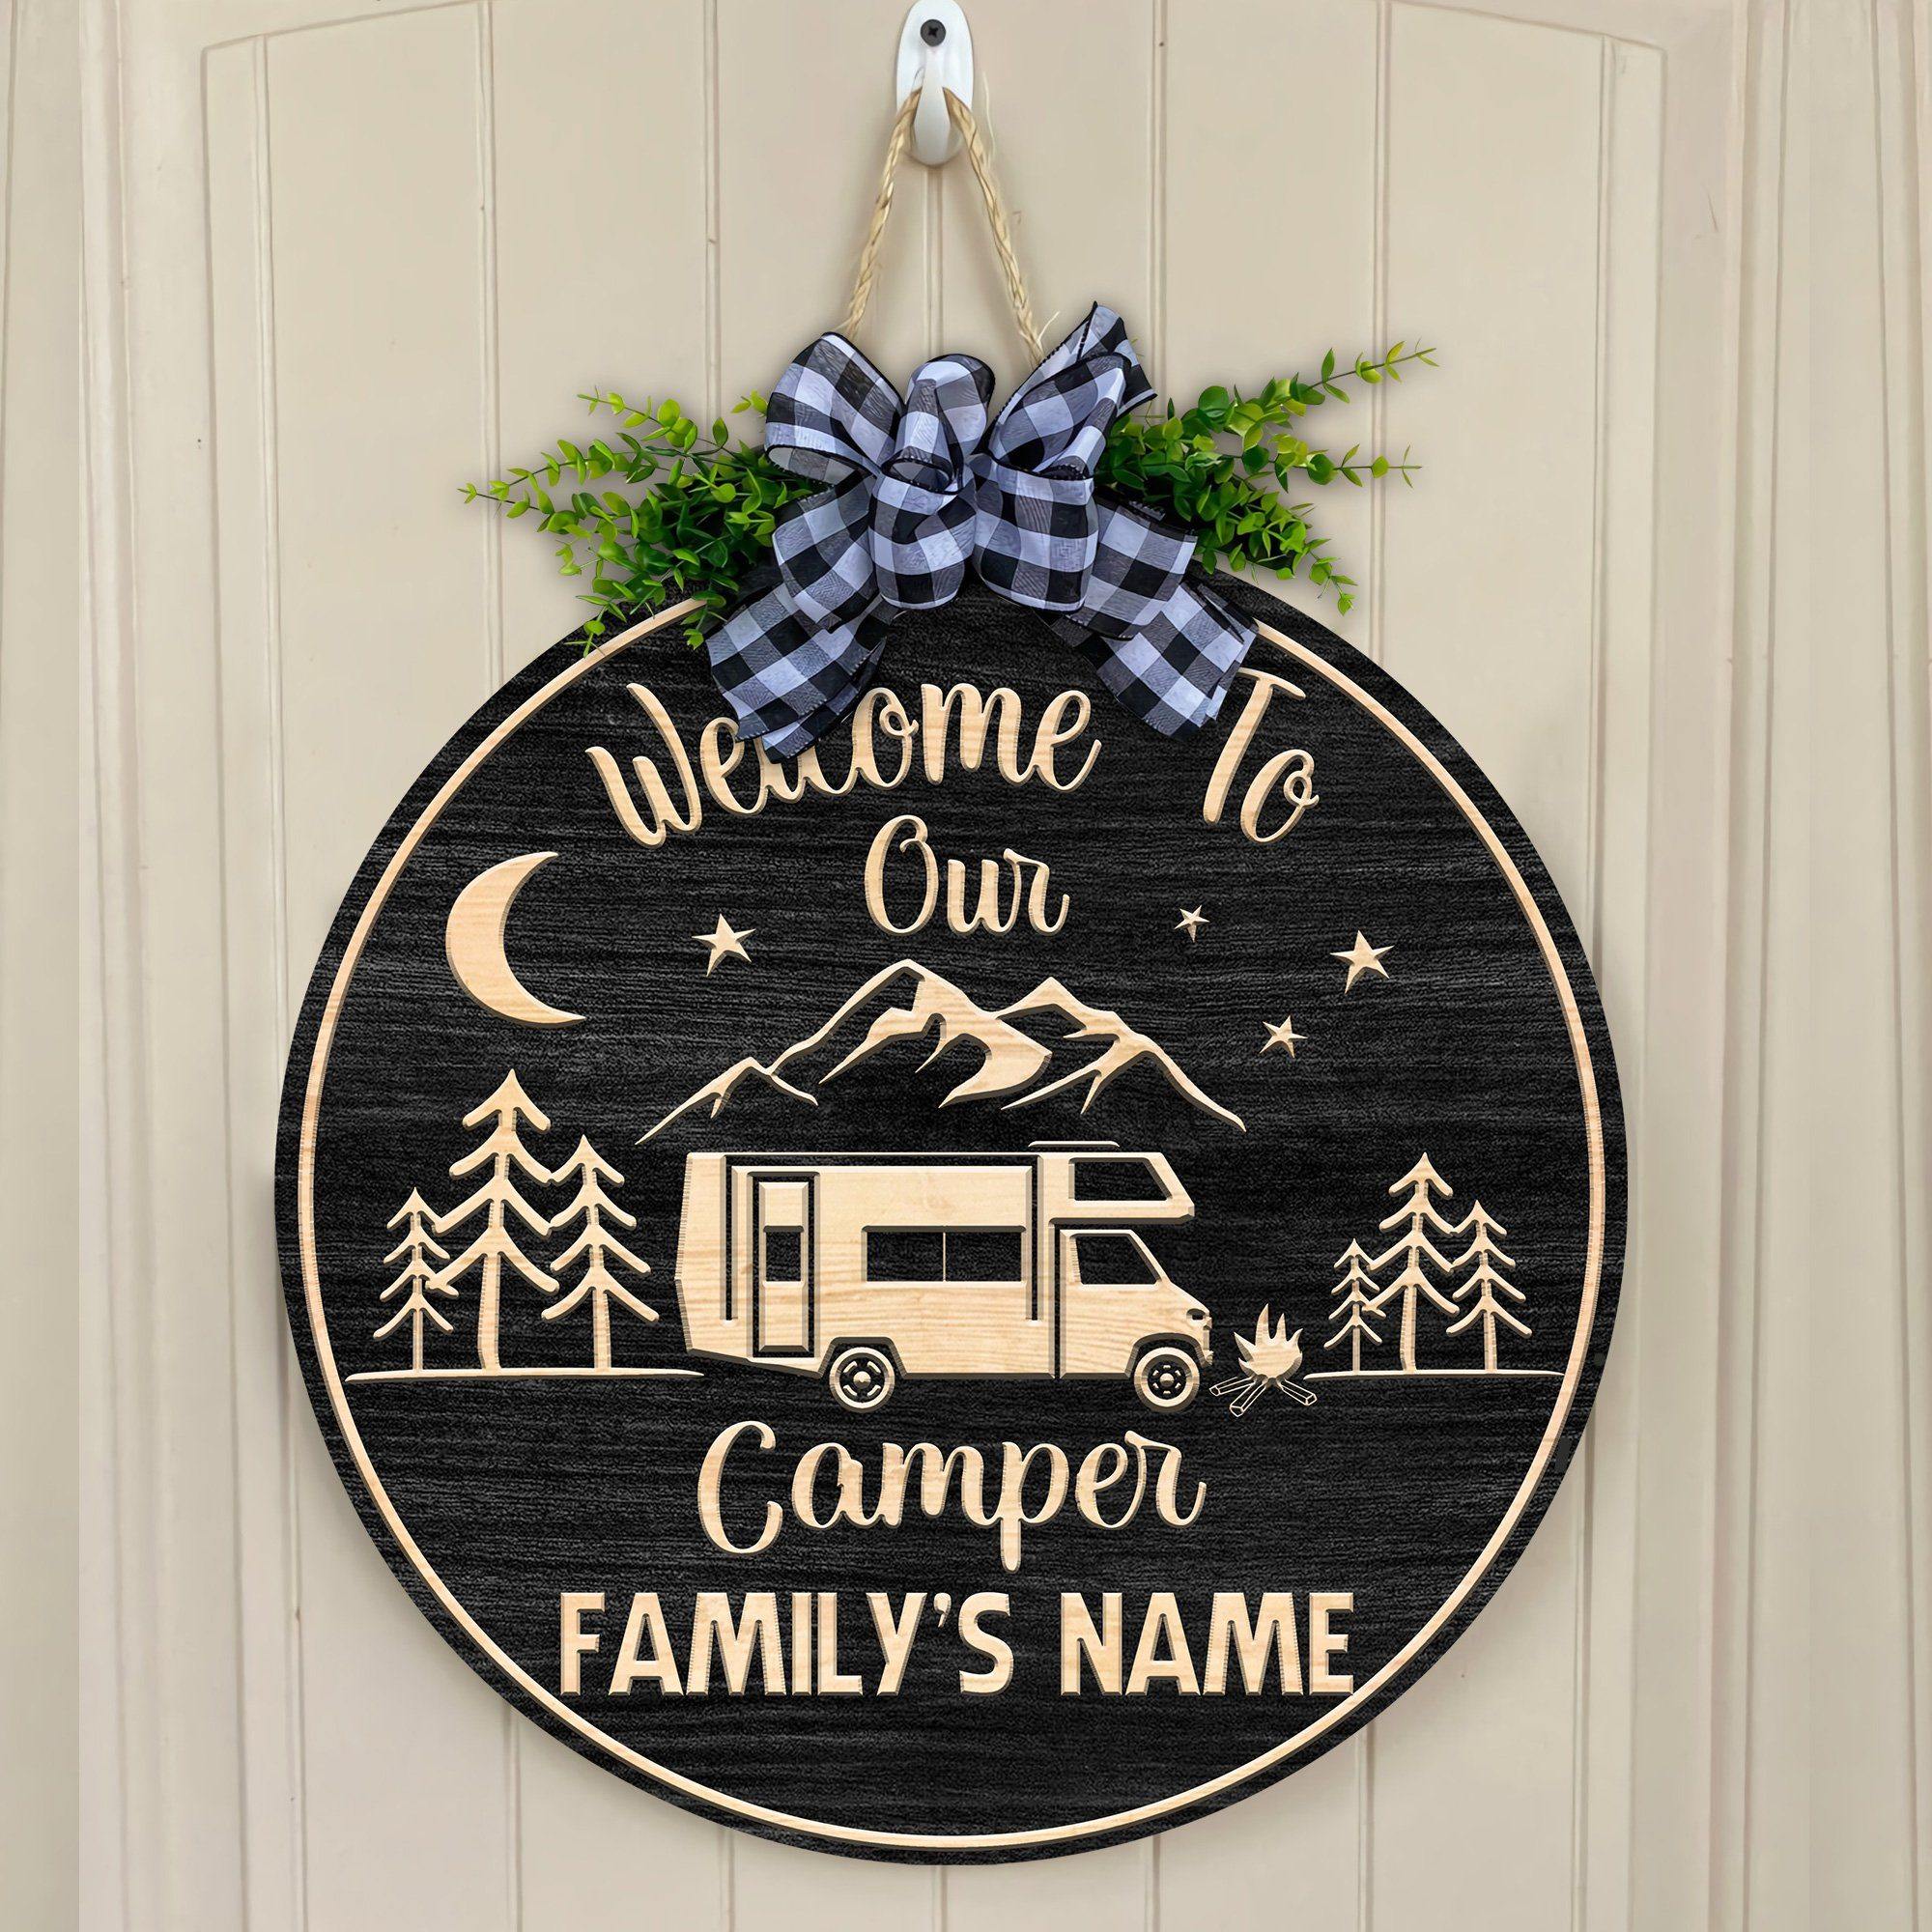 Camping, Camping Decor, Personalized Cutting Board, Teak Wood, Happy  Campers, Camping Sign, Camping Gifts, Camping Gear, gifts for him